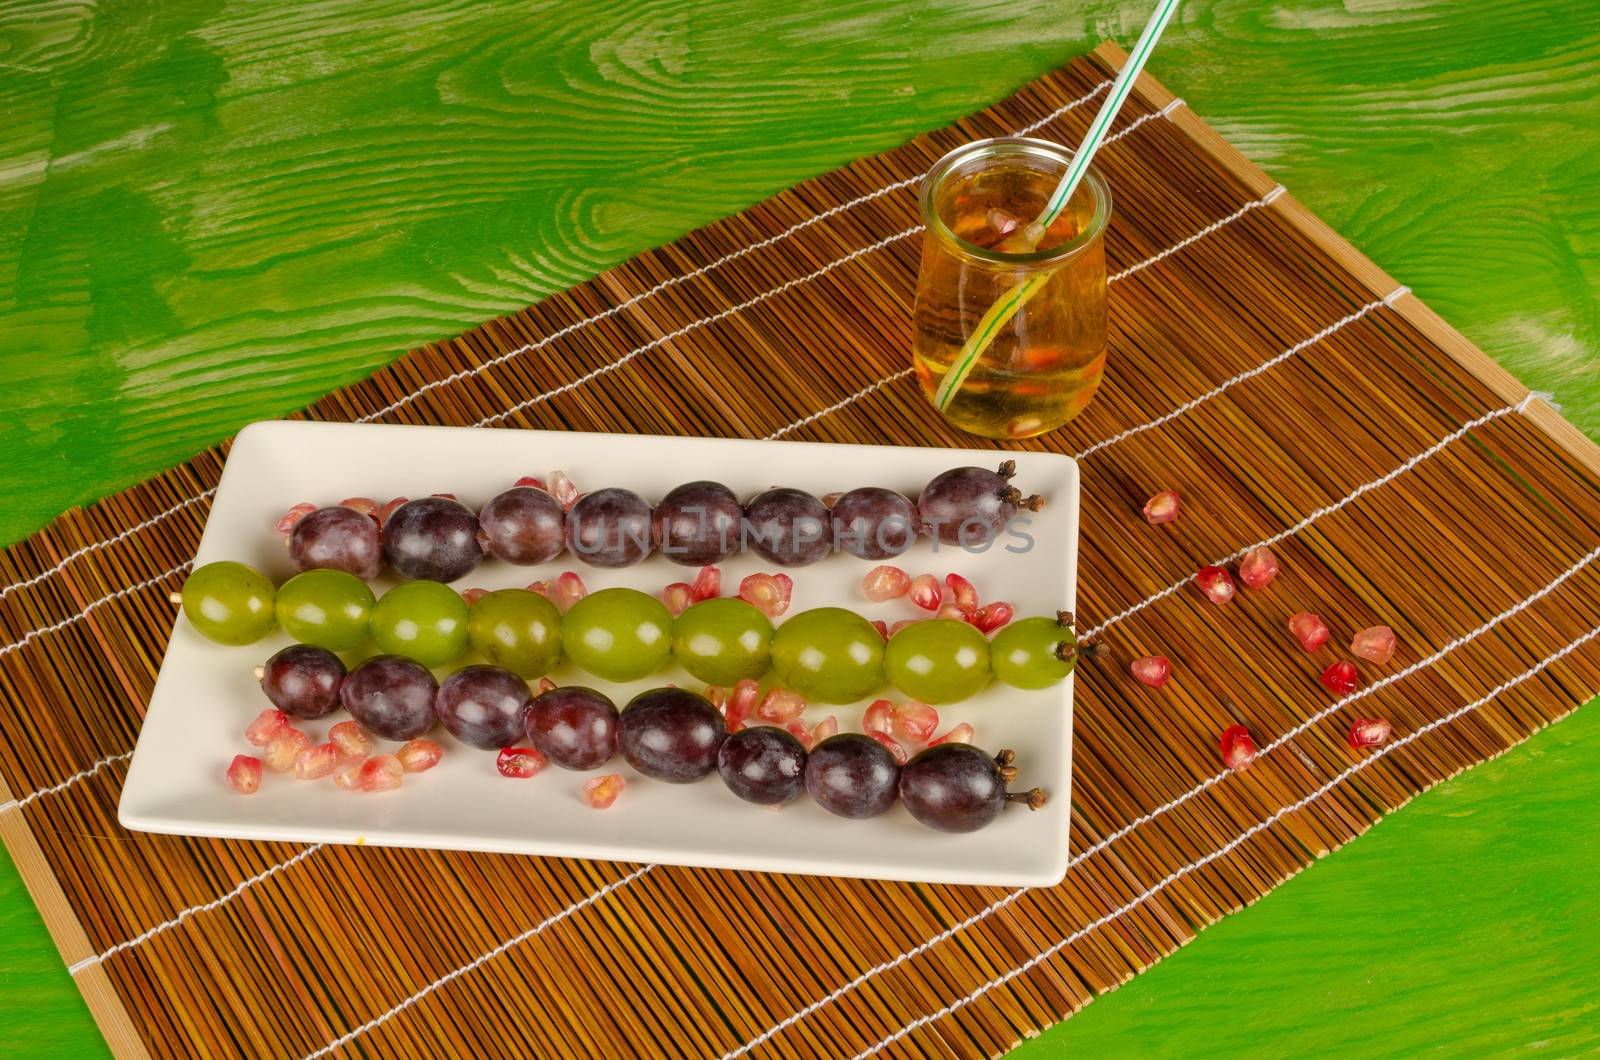 Grapes served as snakes, a kid dessert idea